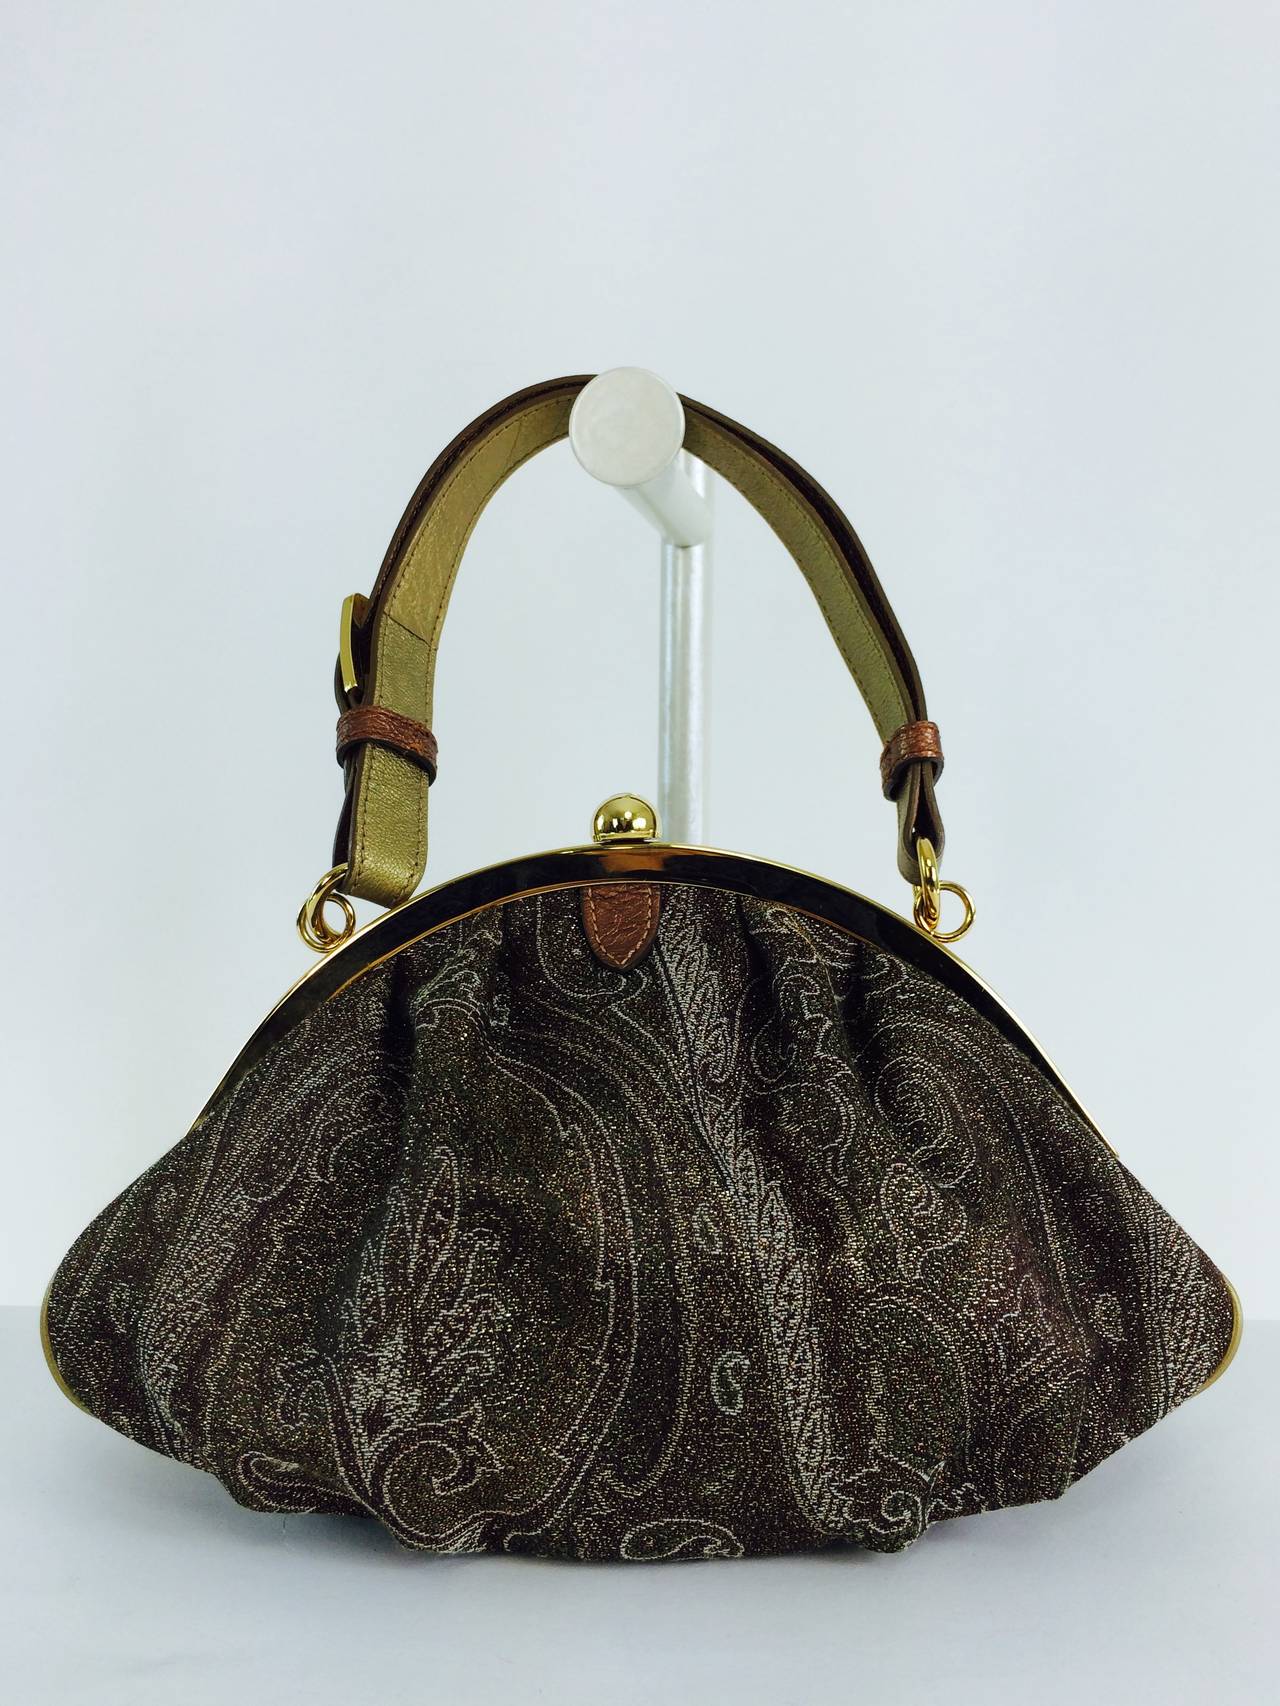 Etro metallic paisley fabric handbag with gold top frame and gold leather handle...Perfect for evening or day...The interior is lined in gold satin, there is a single open pocket inside...In excellent barely used condition...With protector bag and